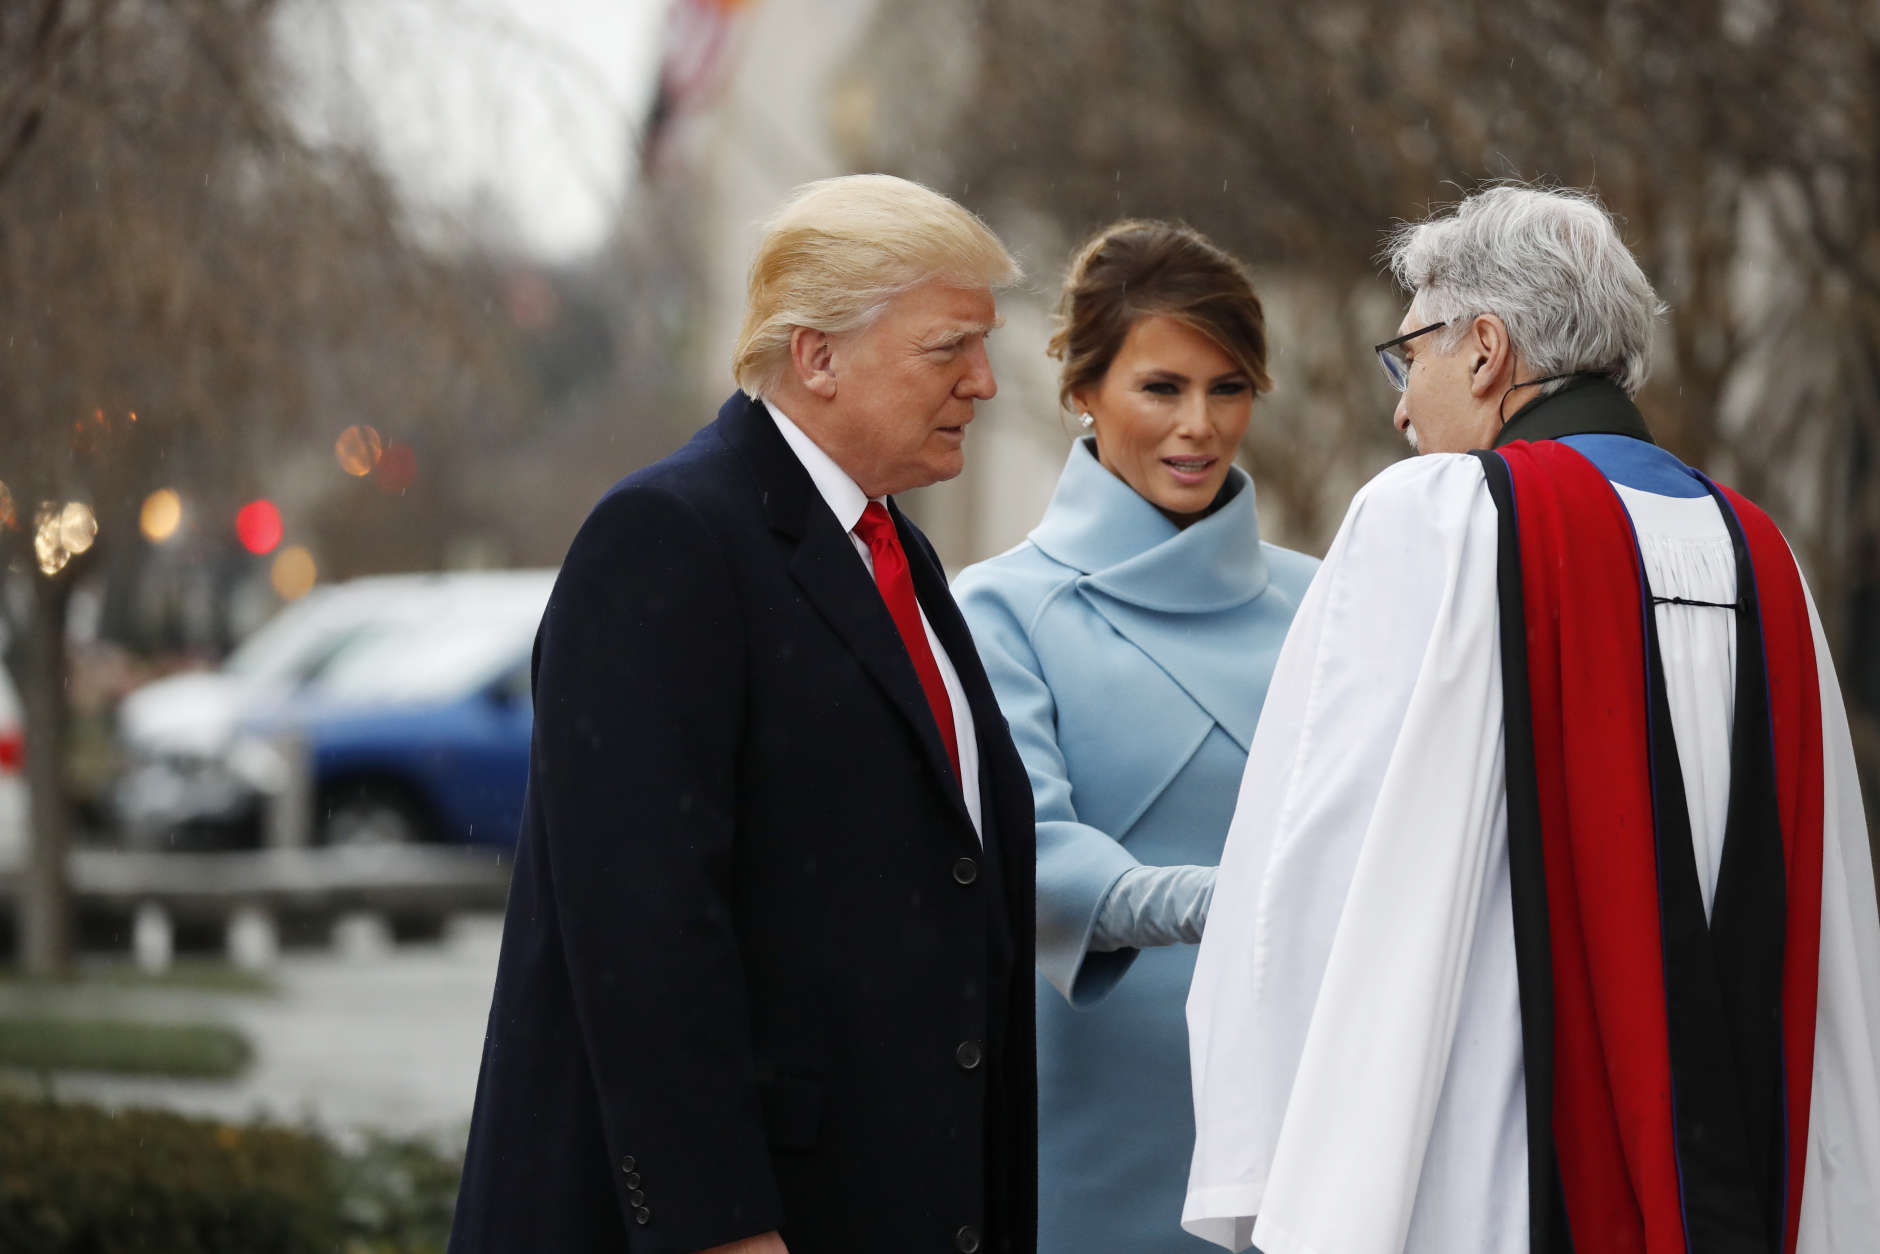 Rev. Luis Leon greets President-elect Donald Trump and his wife Melania as they arrive for a church service at St. John’s Episcopal Church across from the White House in Washington, Friday, Jan. 20, 2017, on Donald Trump's inauguration day. (AP Photo/Alex Brandon)